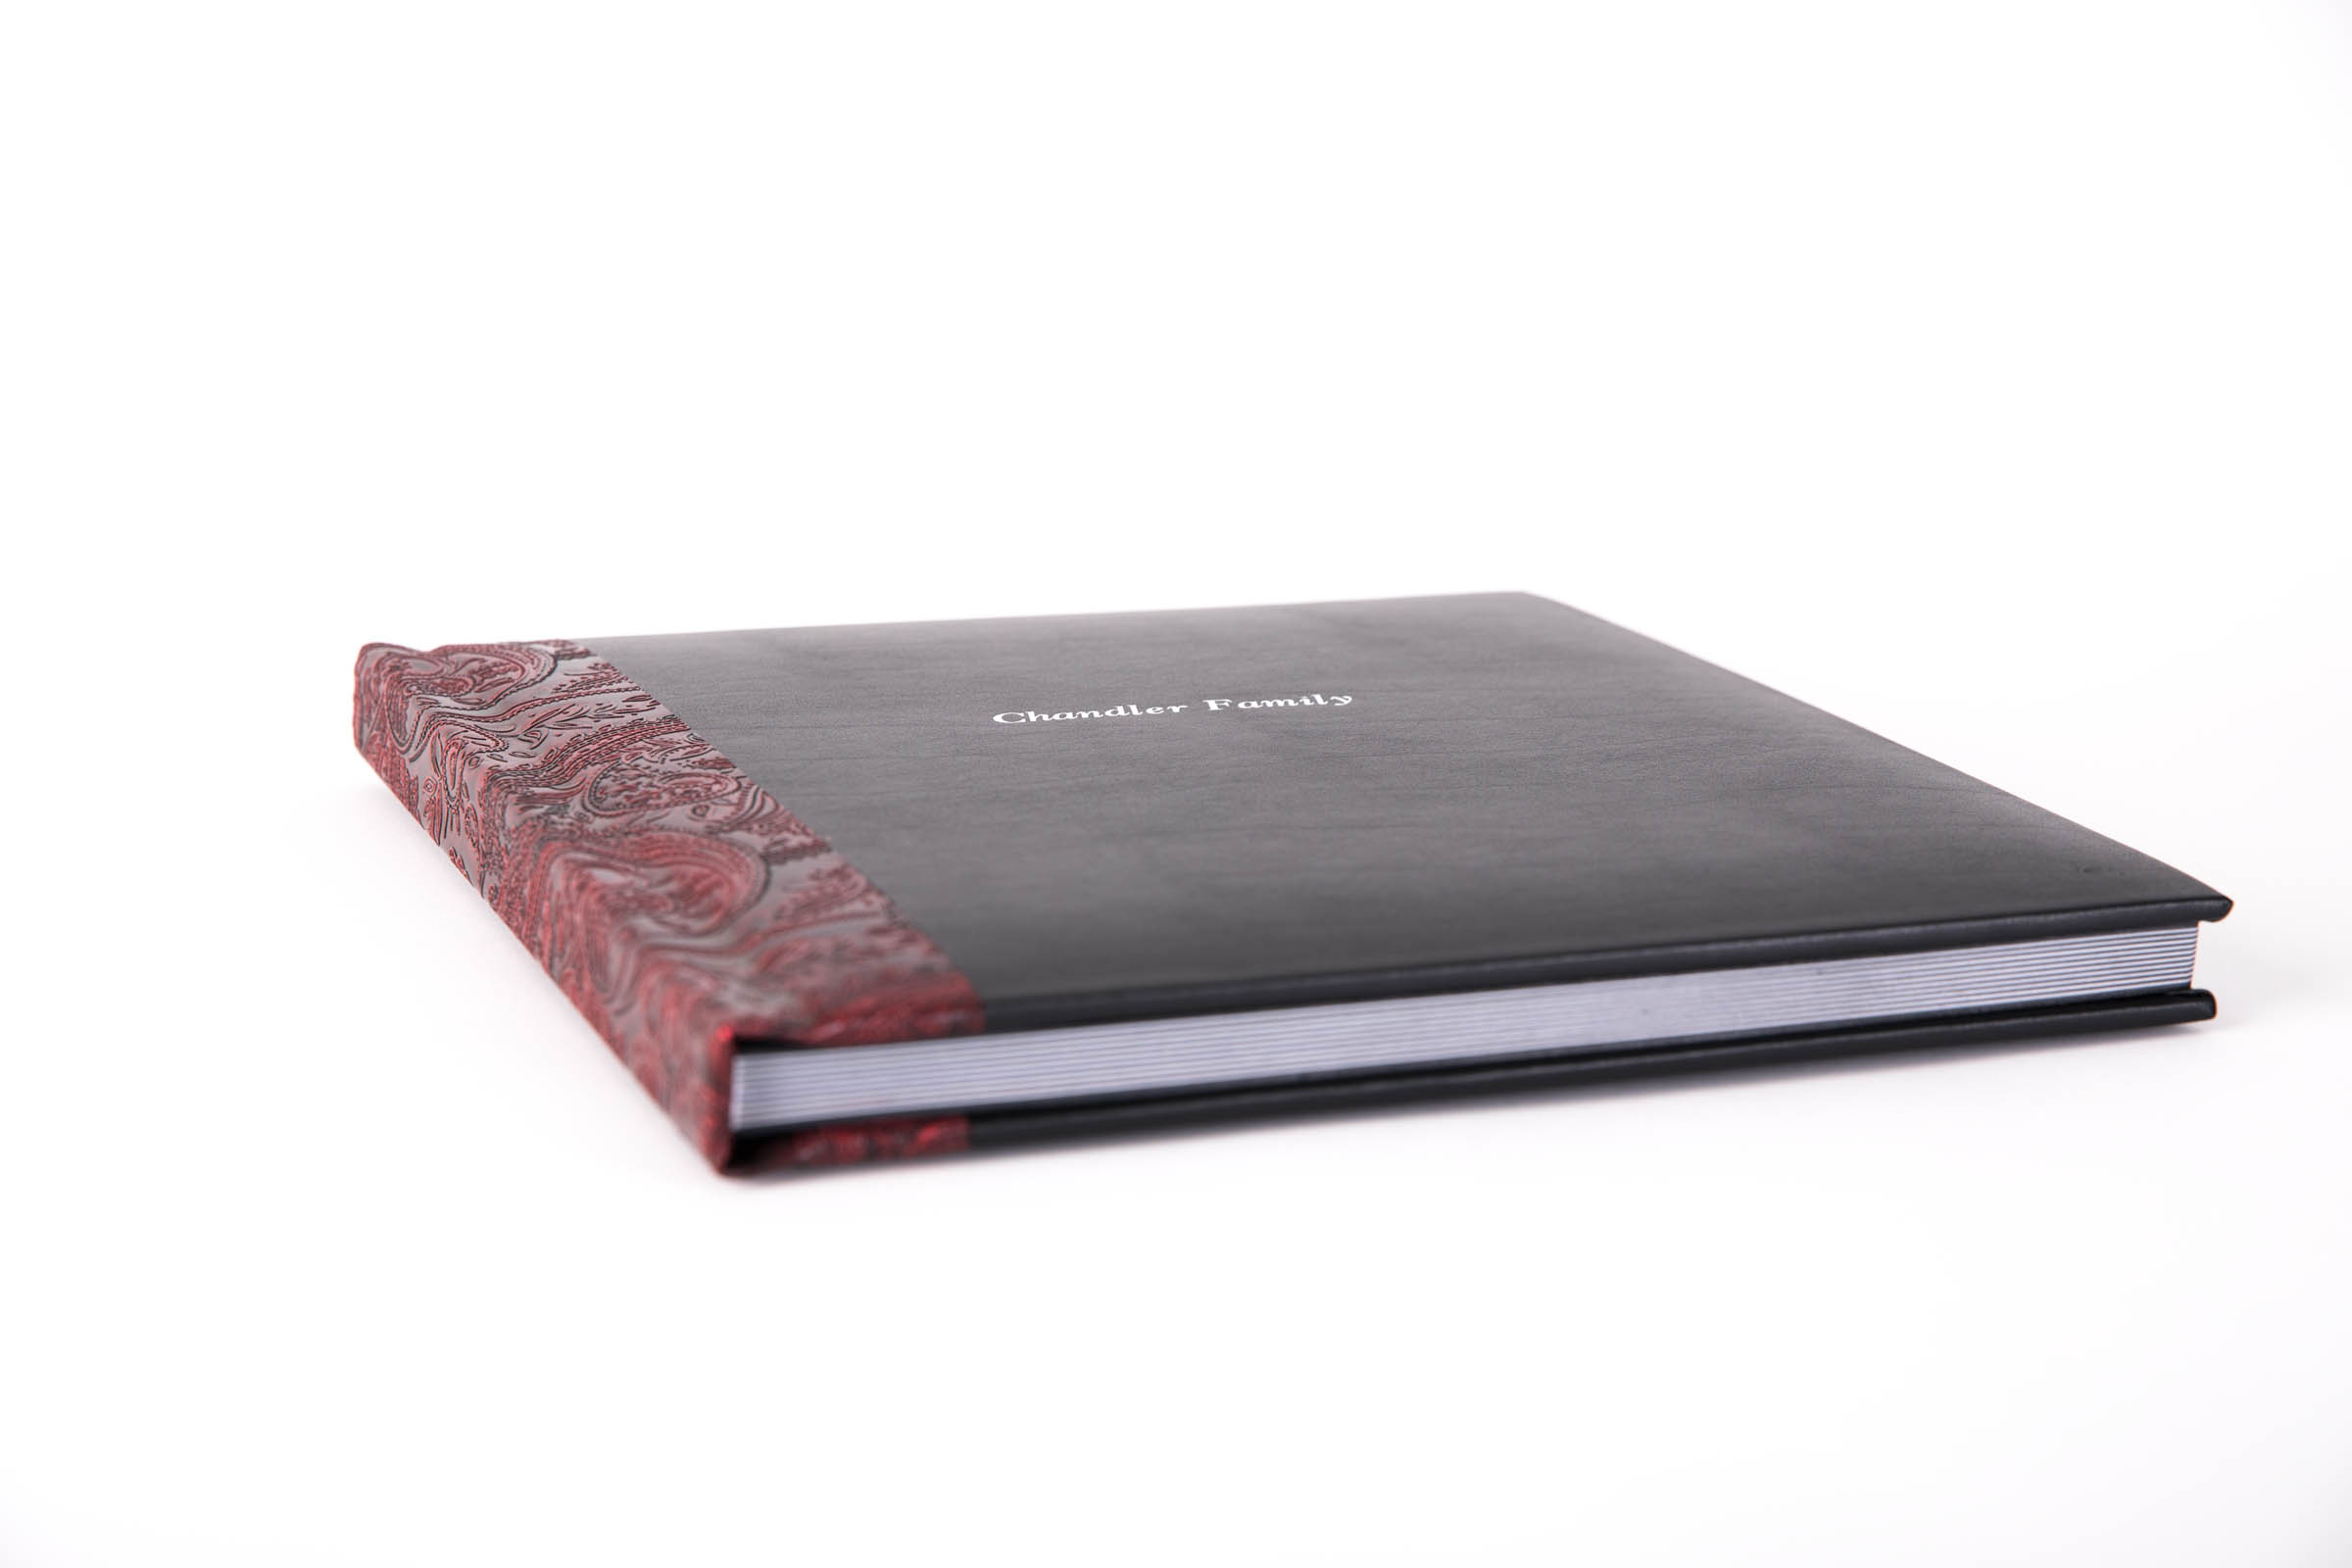 Beautiful luxe heirloom album with black leather cover and red leather tooled binding